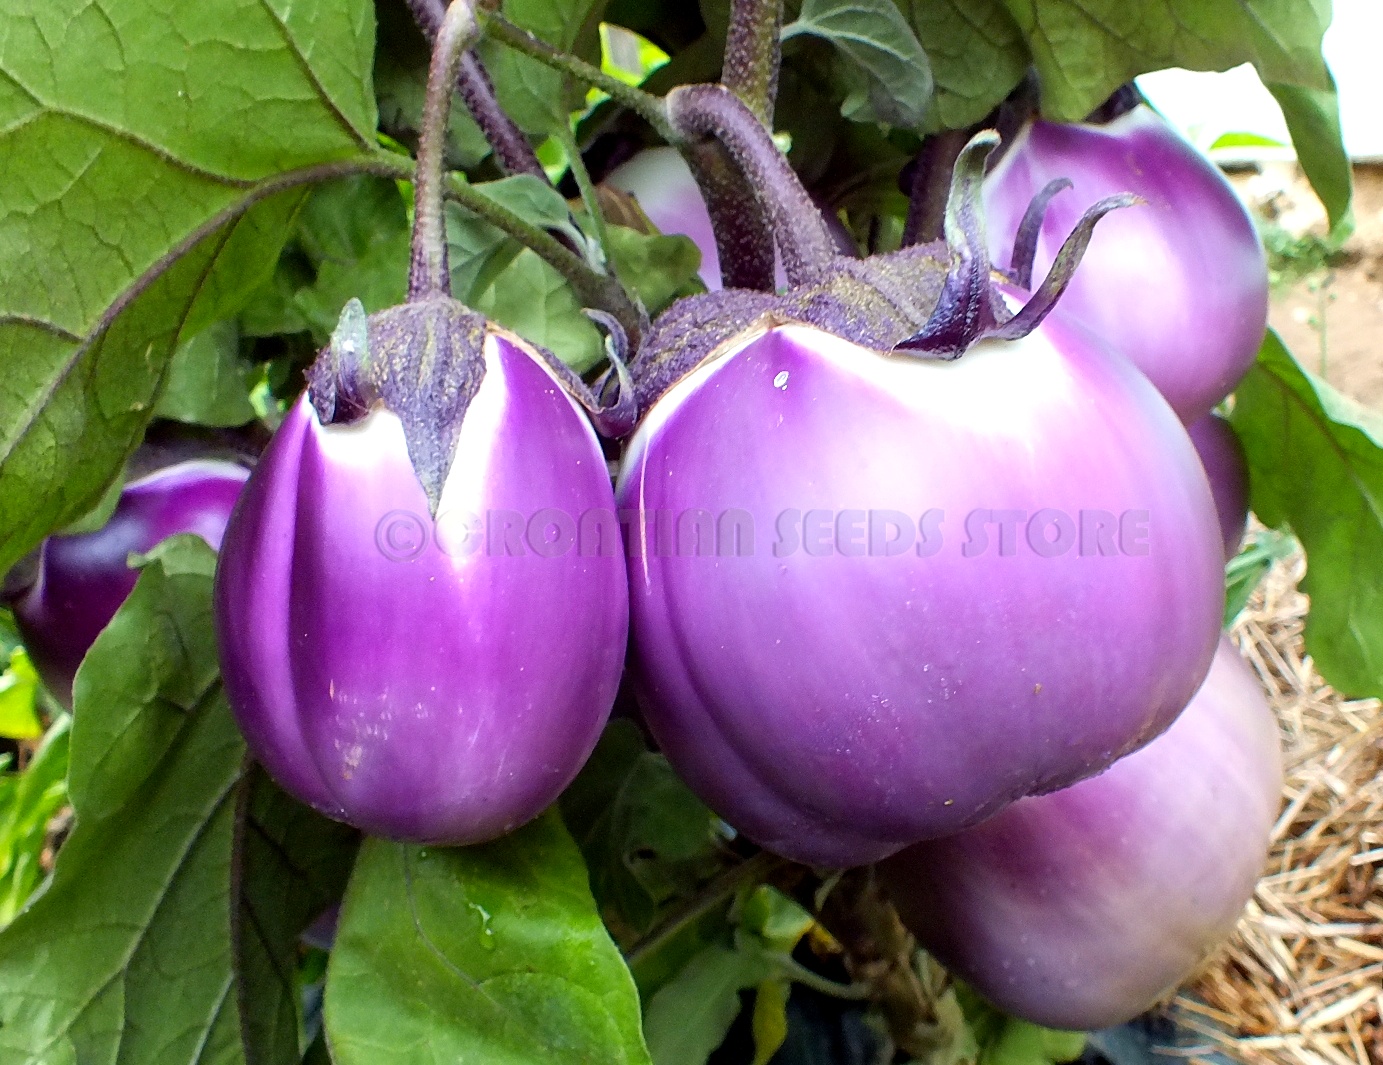 So 015 Graines Aubergine Prosperosa SPECIAL and FINE! 10+ seeds 